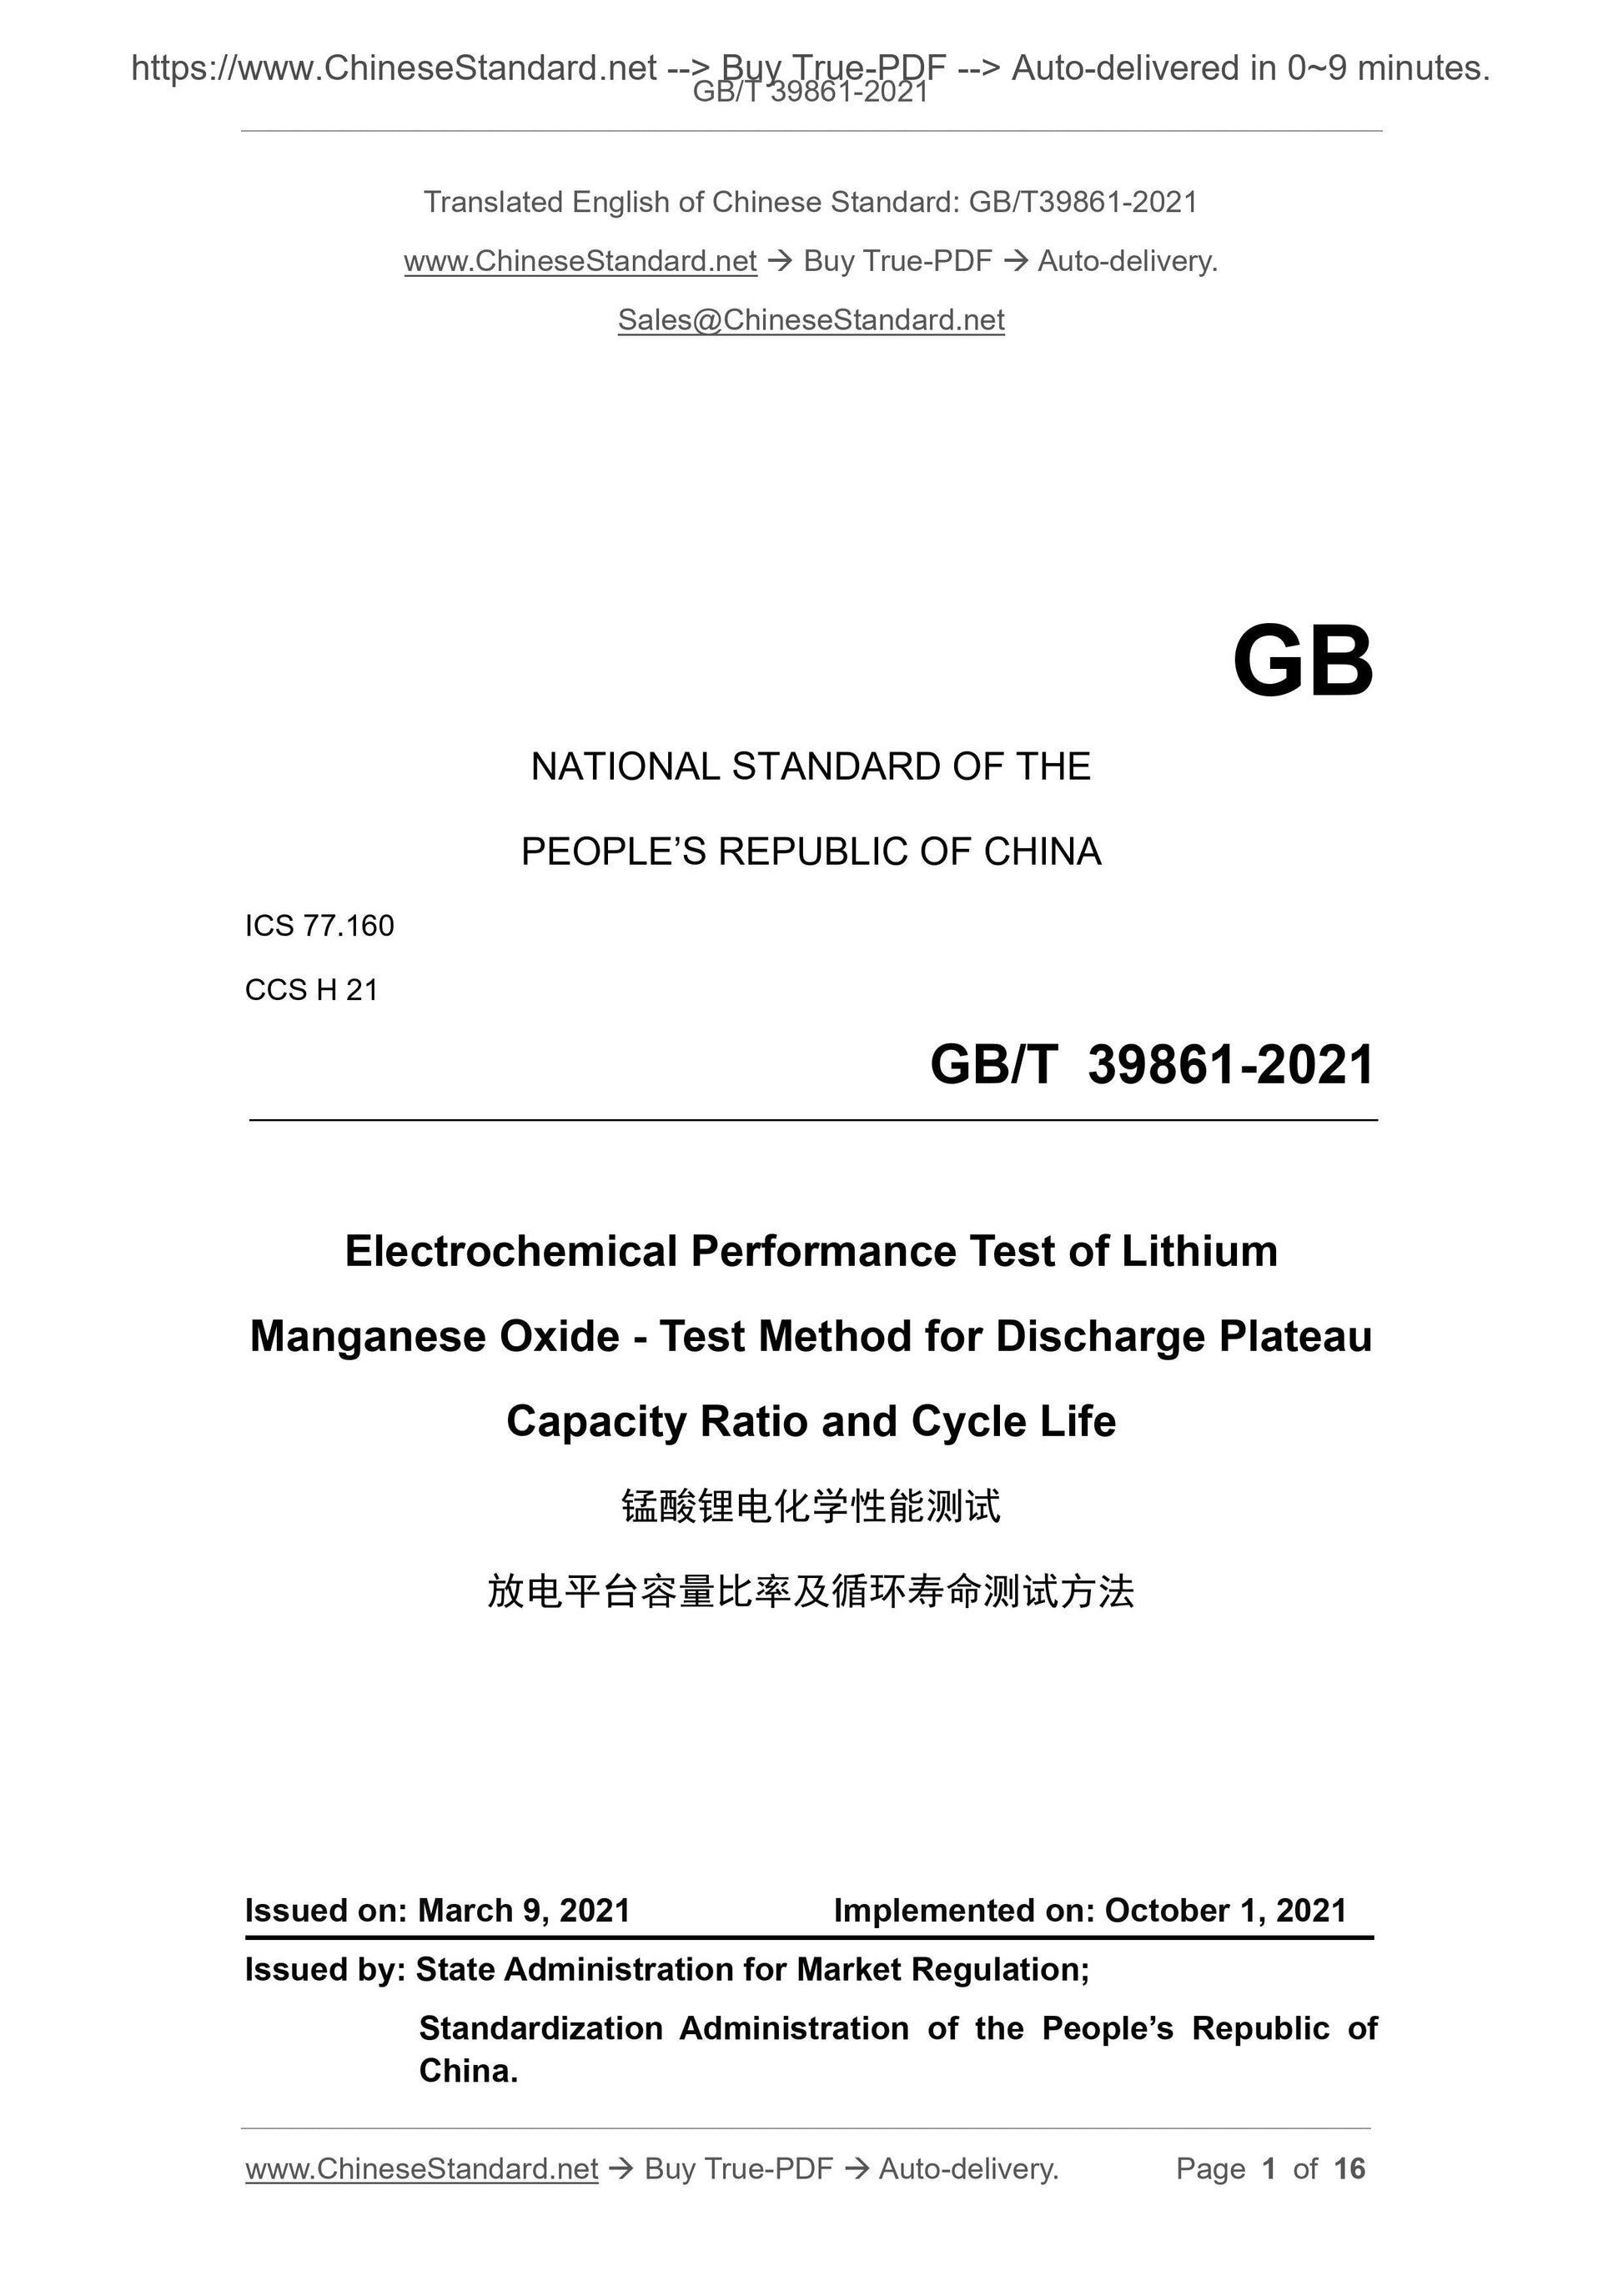 GB/T 39861-2021 Page 1